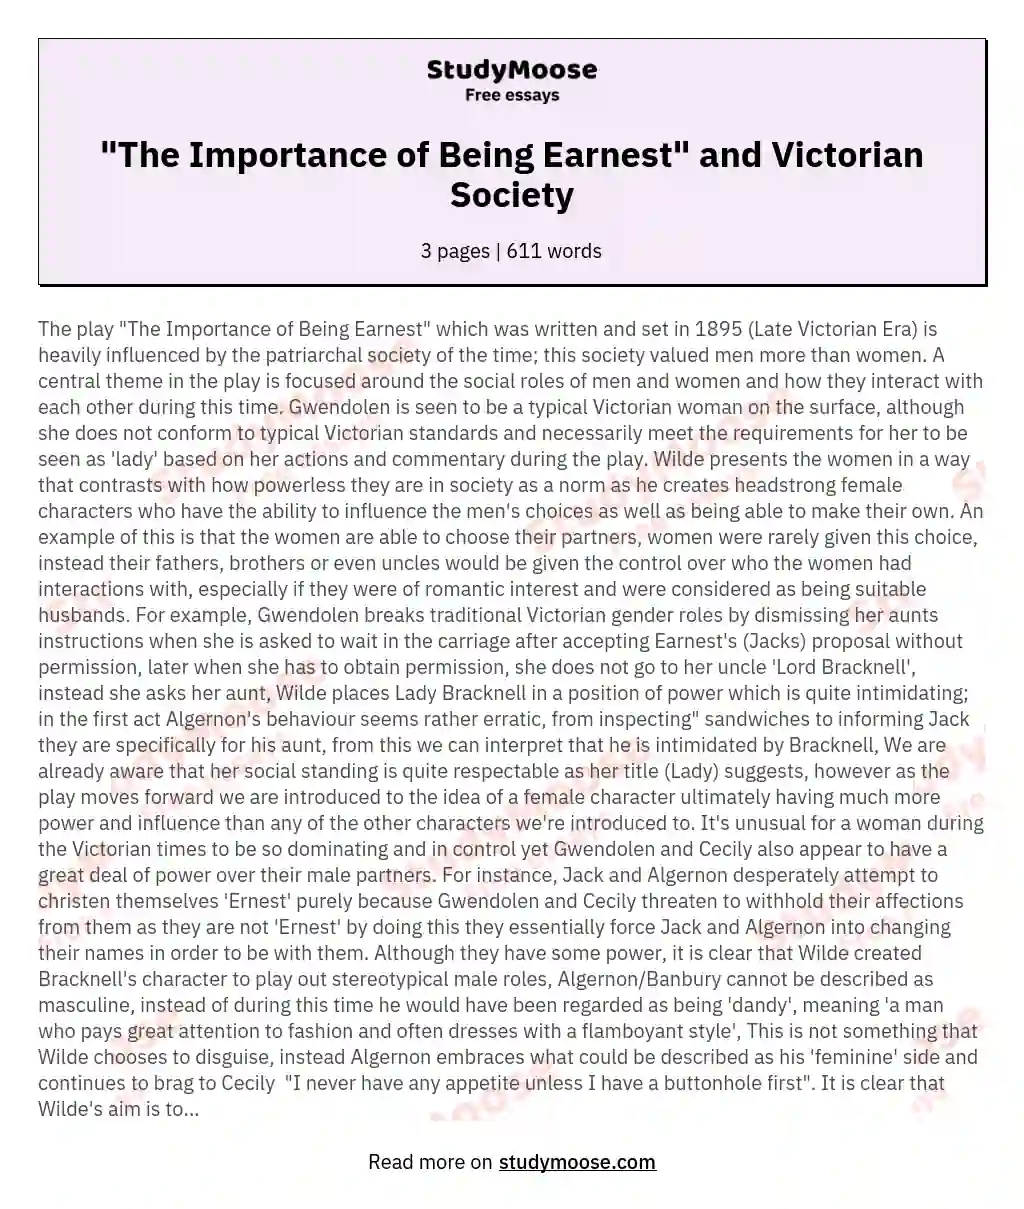 "The Importance of Being Earnest" and Victorian Society